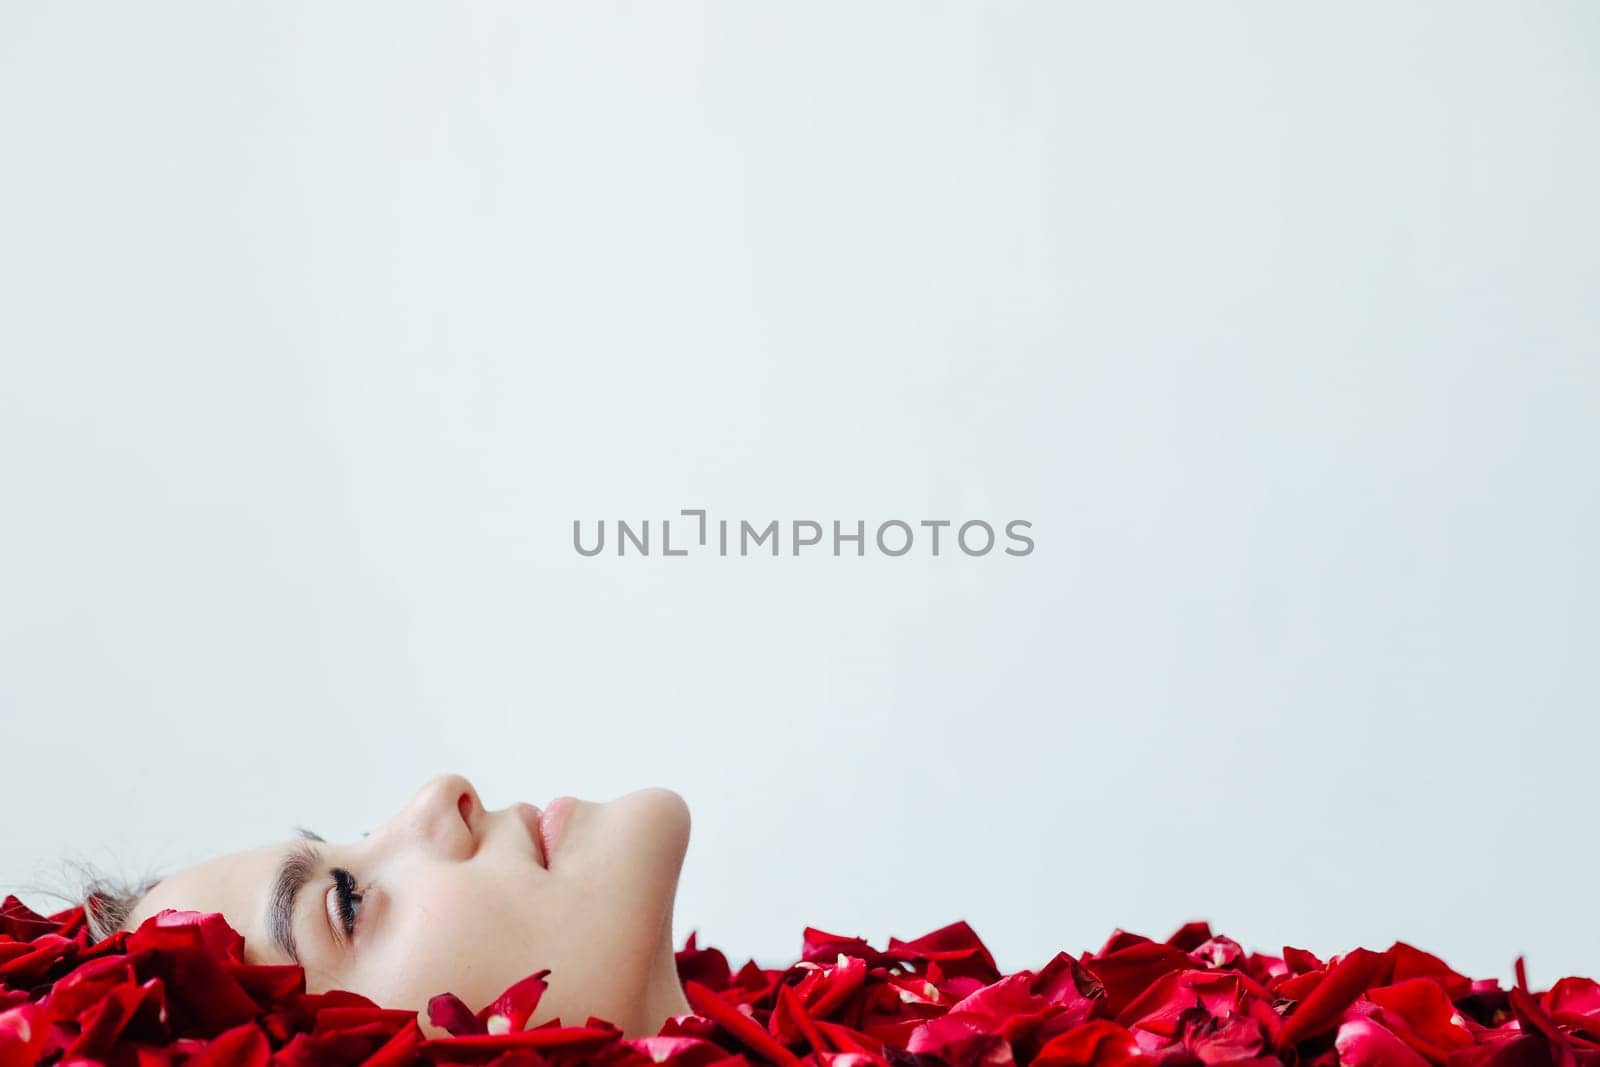 the face of woman in red rose petals on a light background